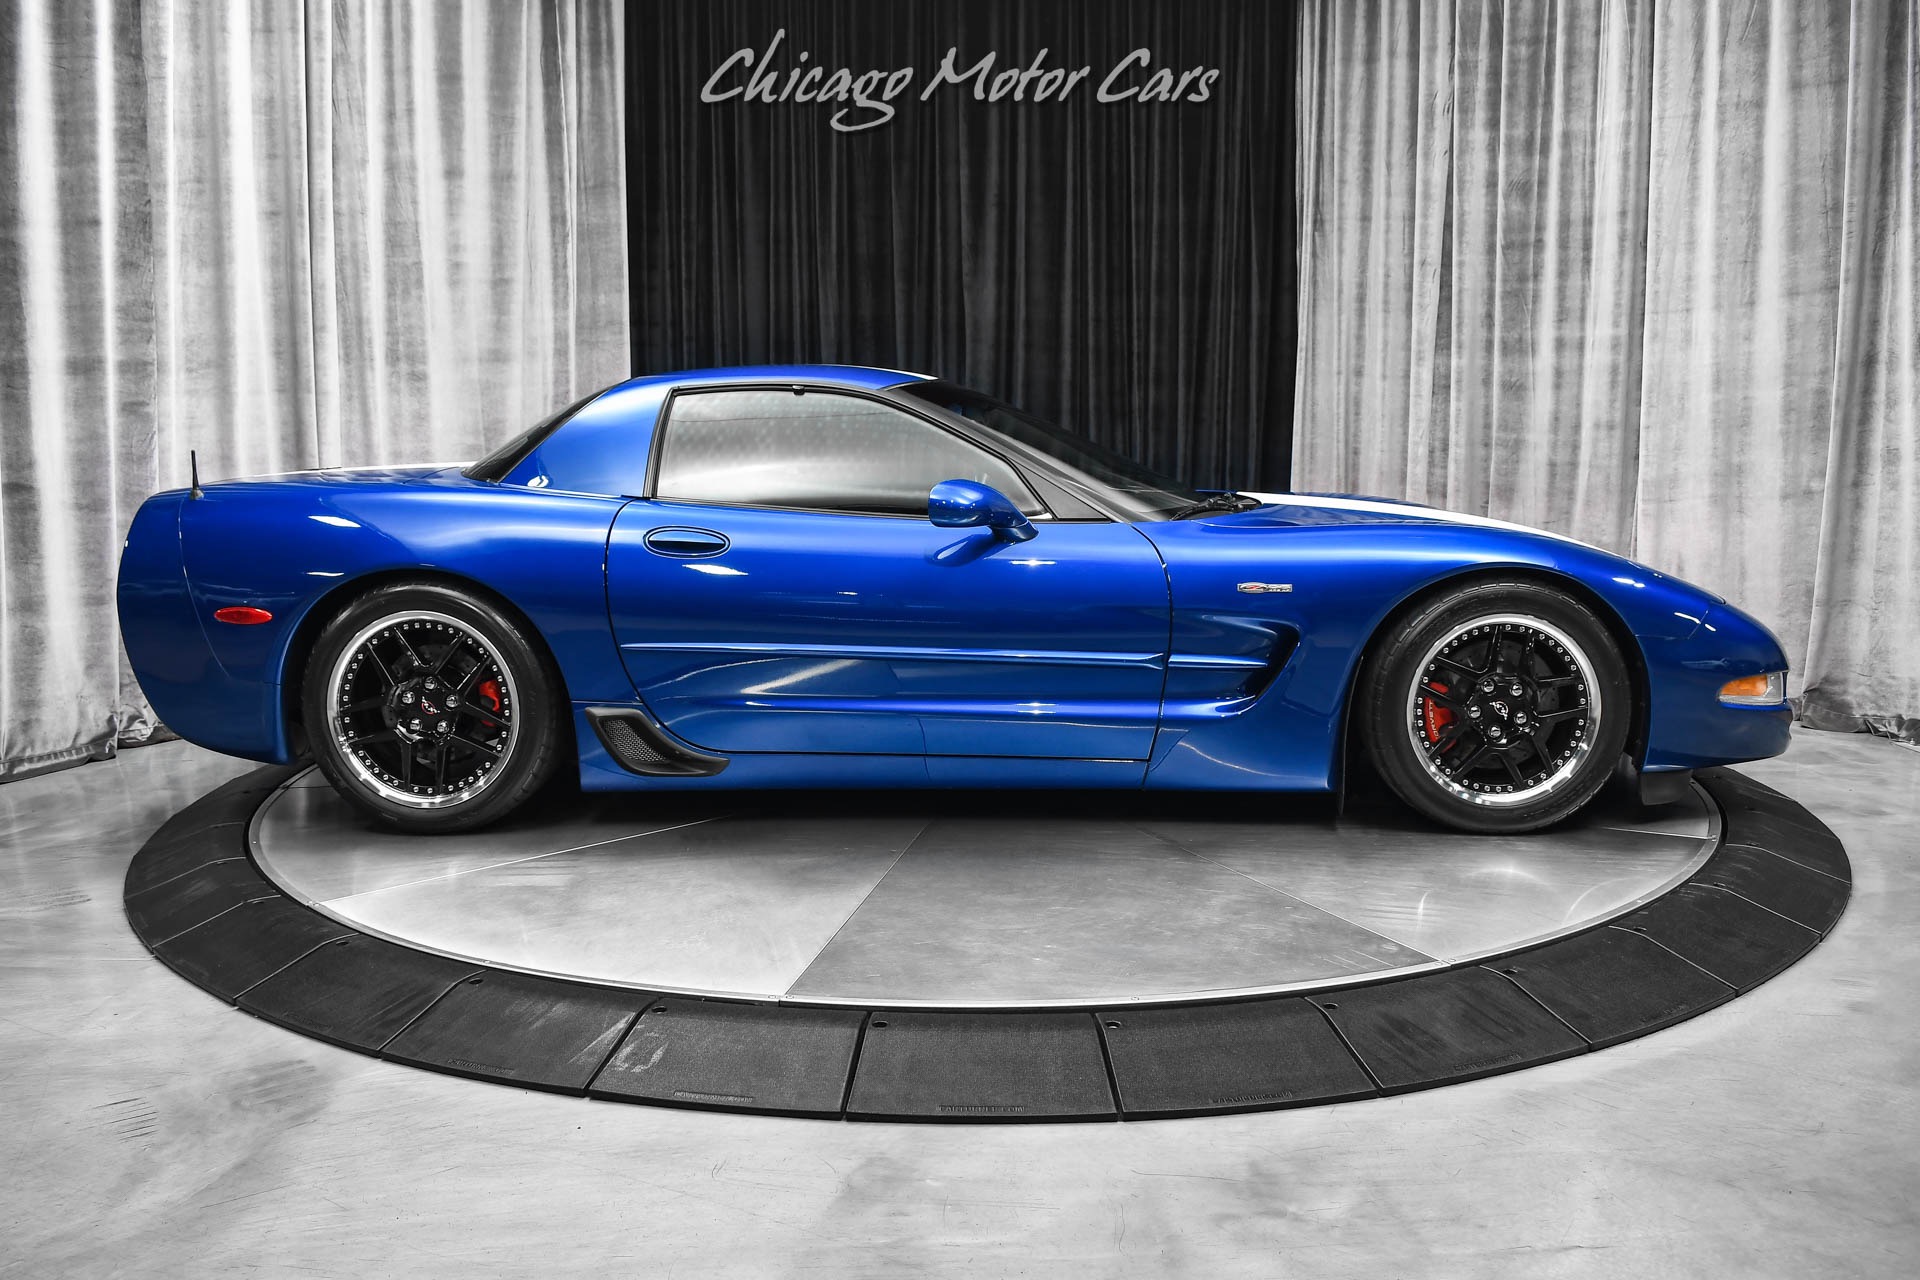 Used-2002-Chevrolet-Corvette-Z06-FORGED-LS7-550WHP-UNICORN-BUILD